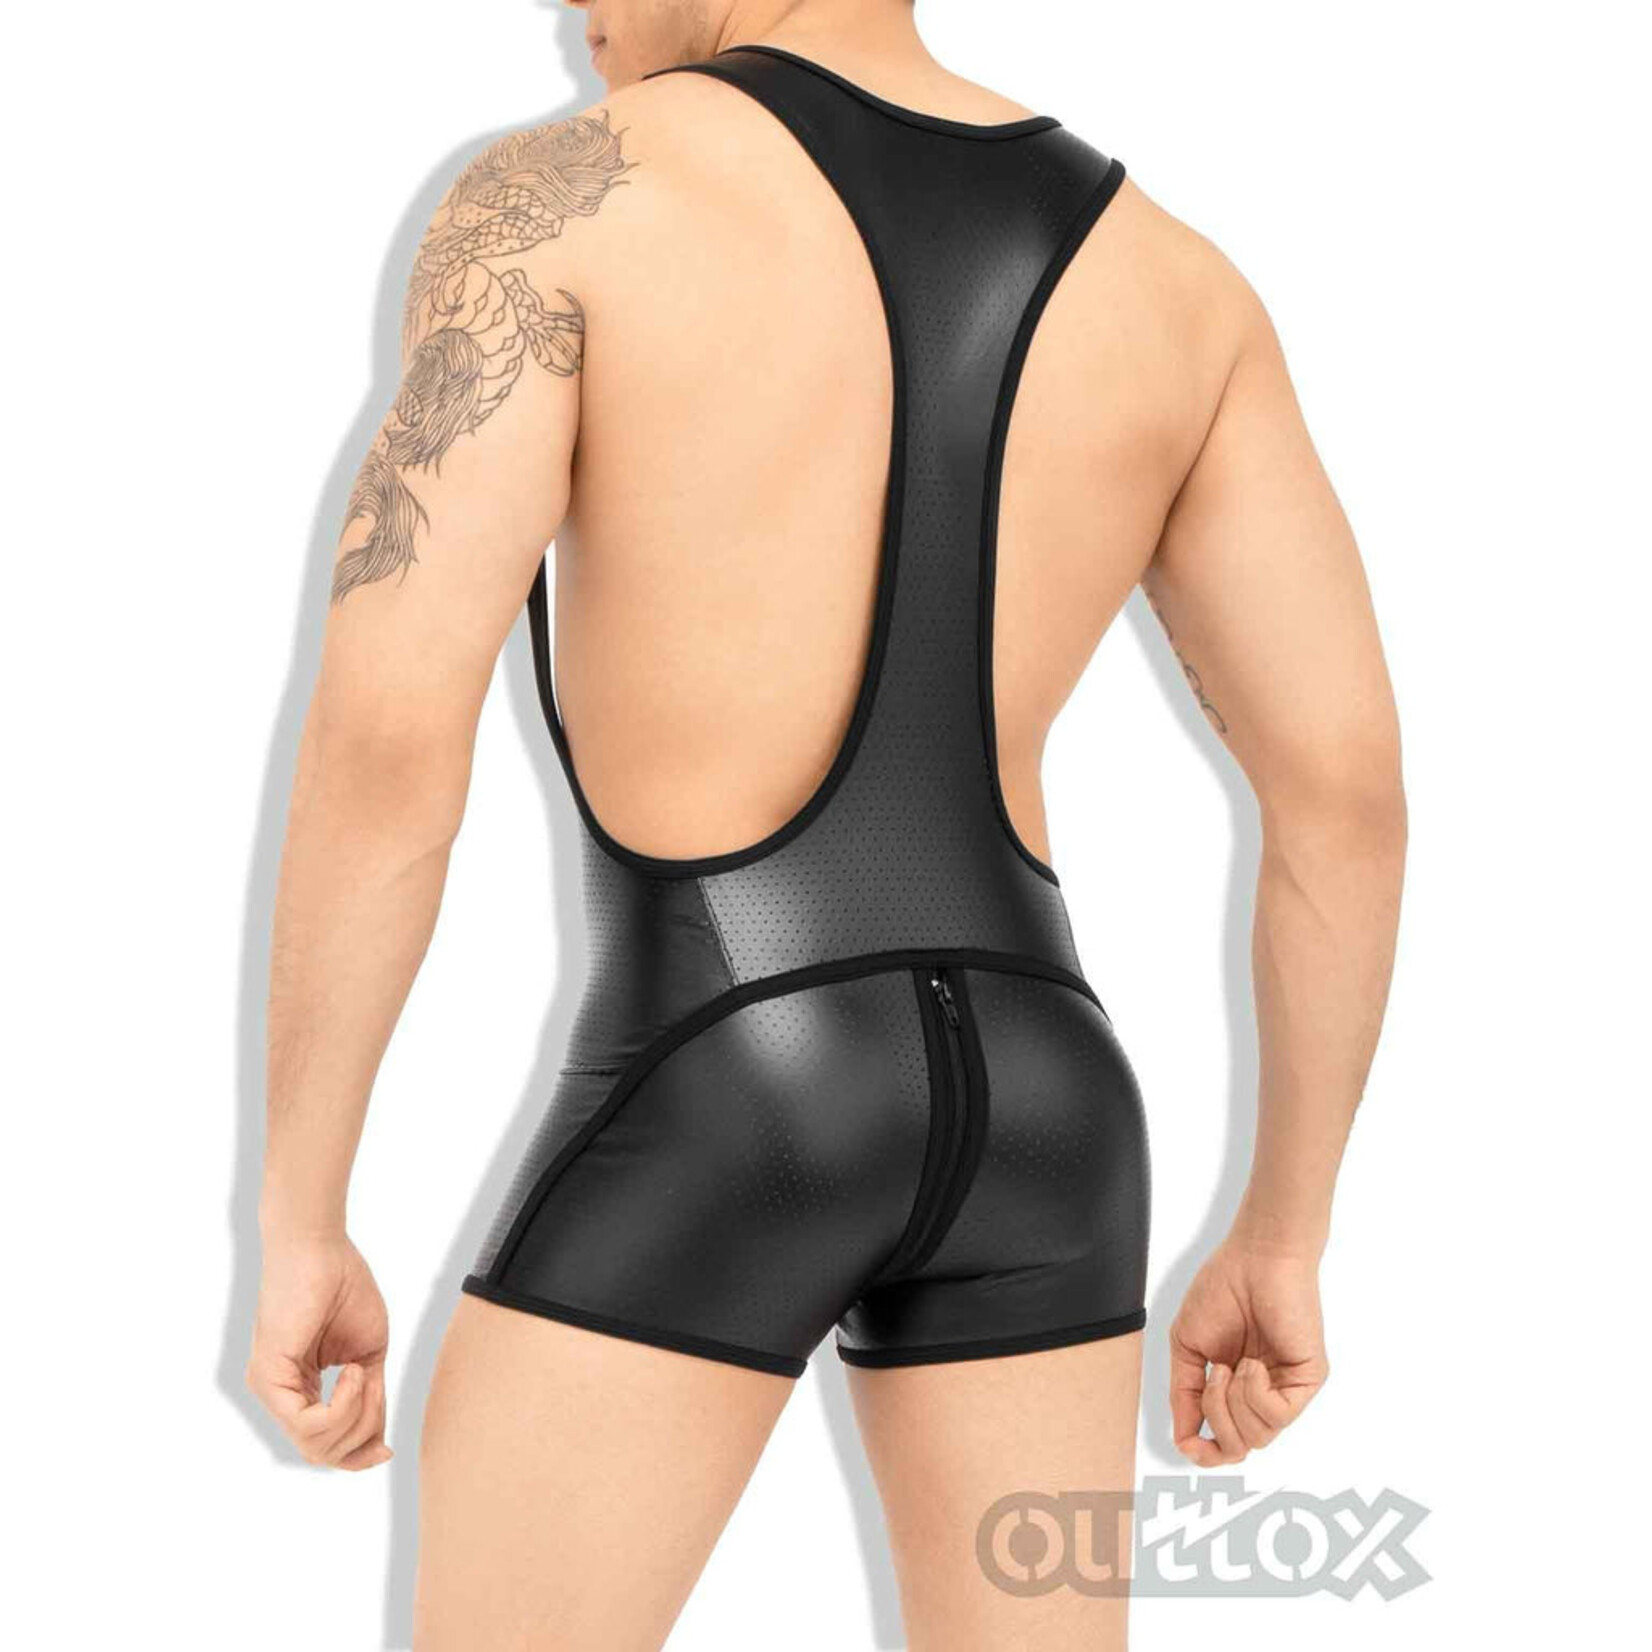 Maskulo/Outtox Outtox Zippered Rear Wrestling Singlet